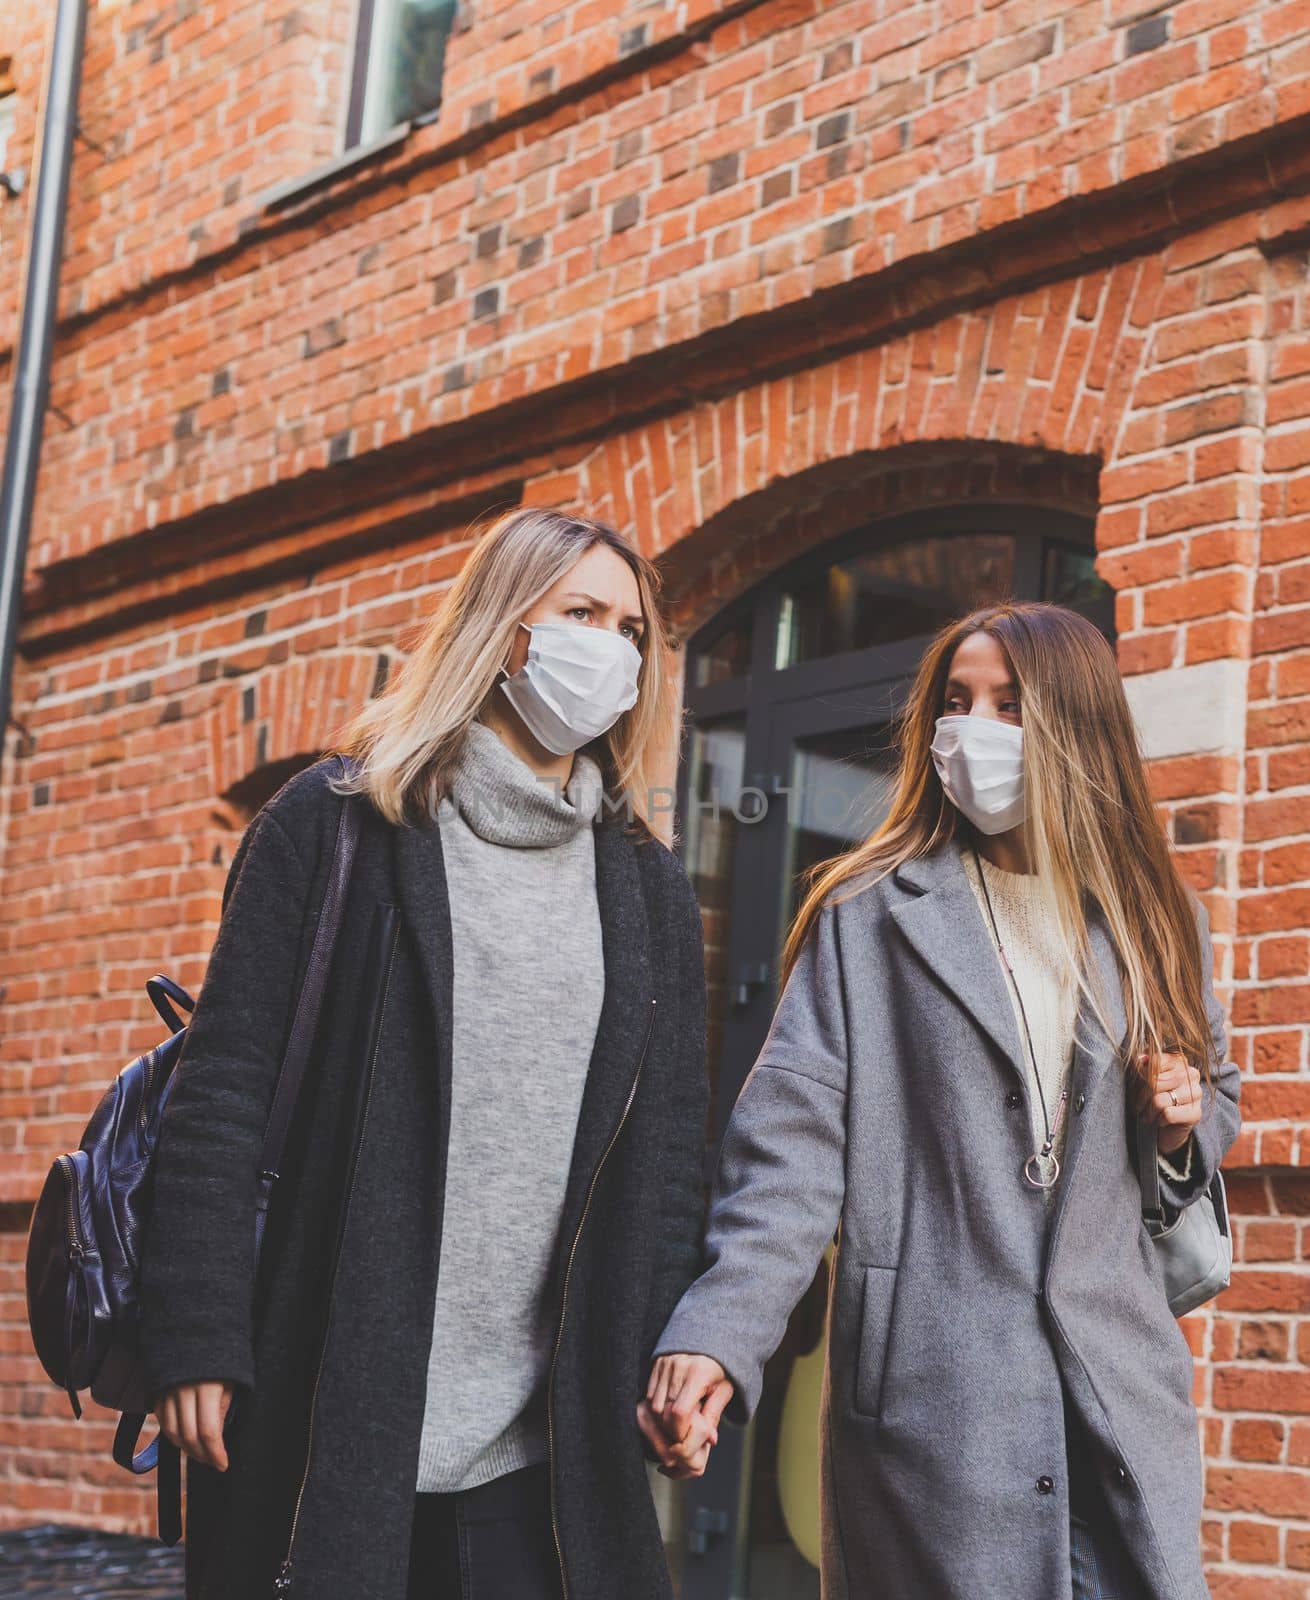 Young pretty girls friends in medical masks having fun outdoor in autumn evening in city laughing - end of pandemic concept by Satura86